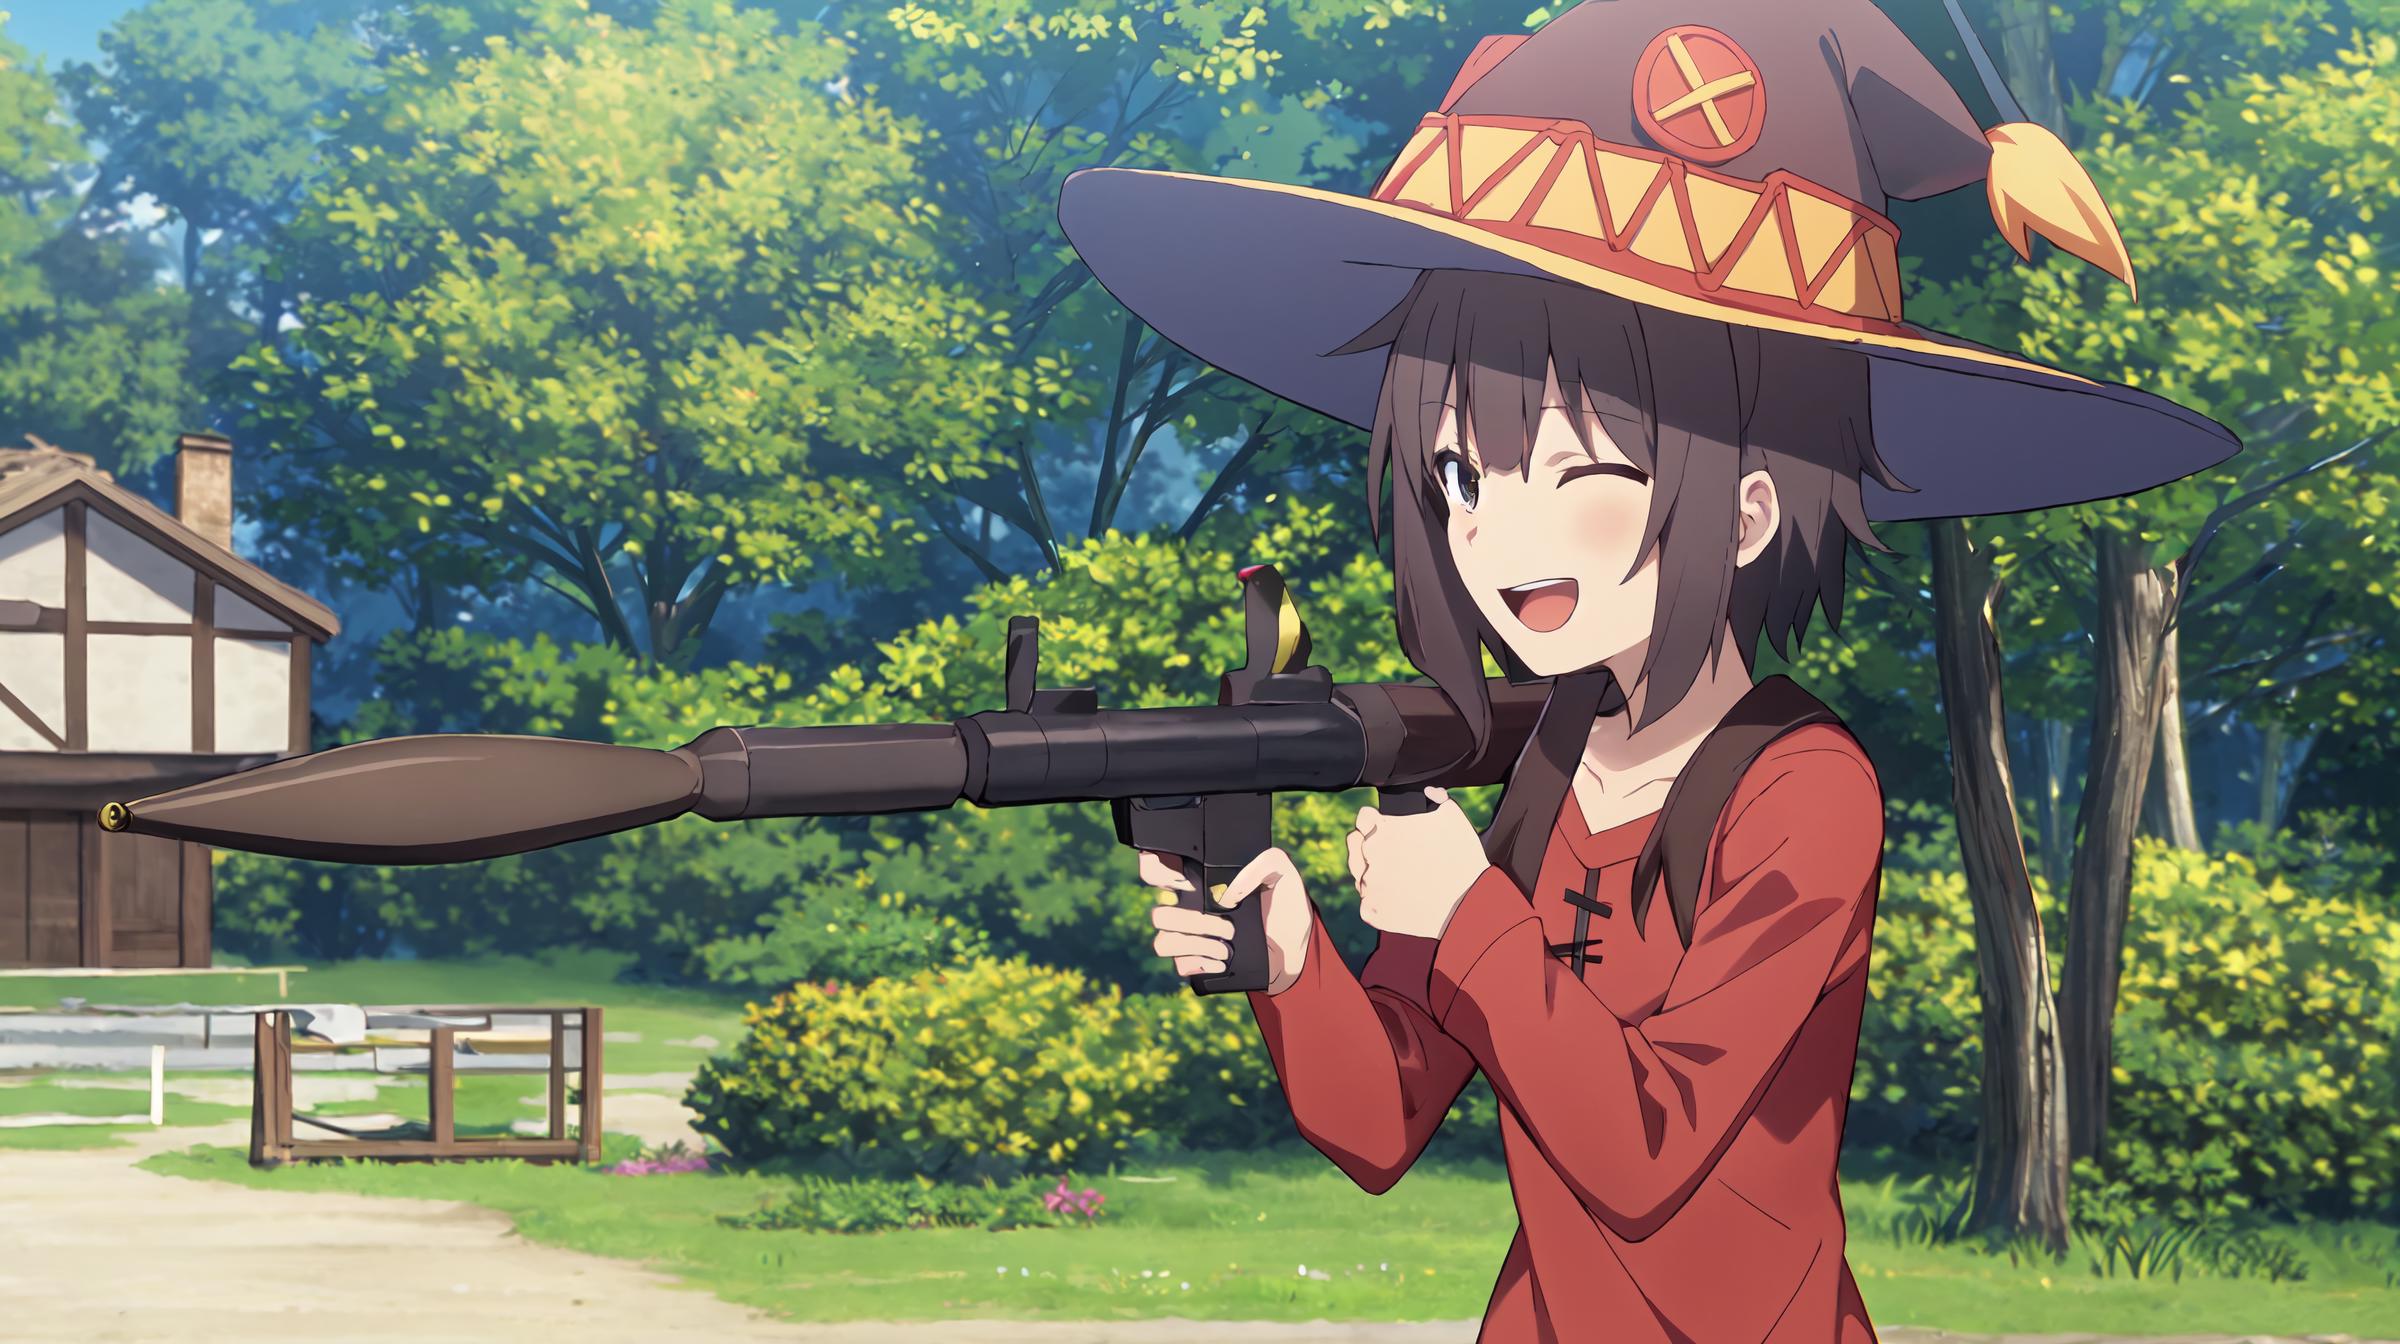 A girl holding a gun with a happy expression.